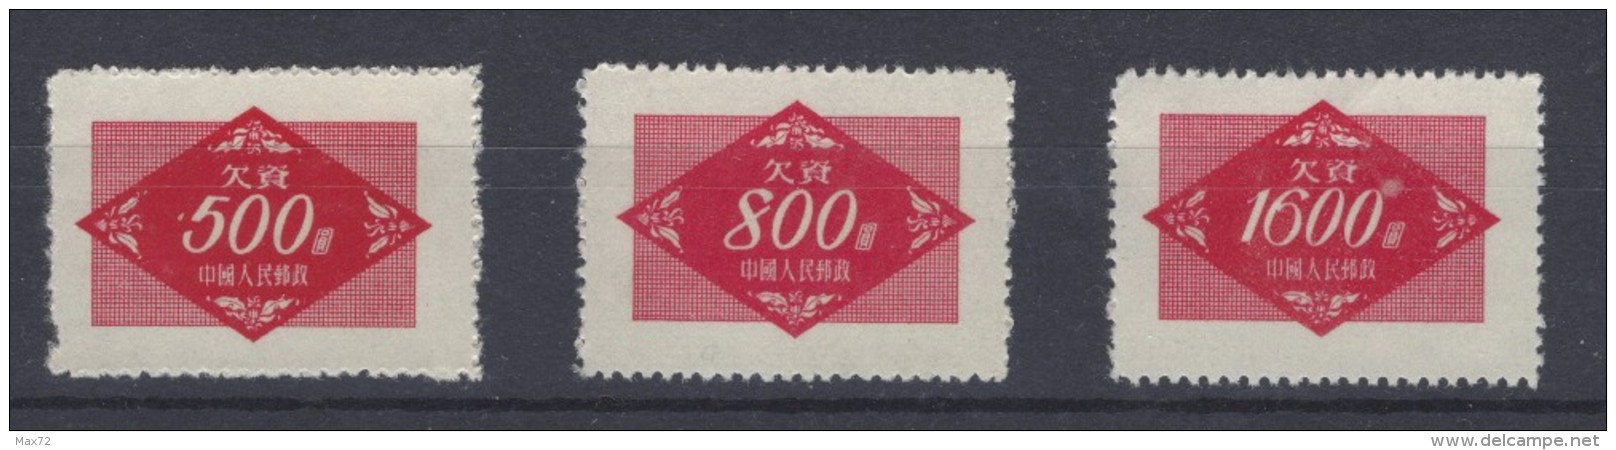 1954 CHINA MILITAR STAMPS MICHEL NR 12/14 MNH WG LIKE USUAL - Militaire Vrijstelling Van Portkosten